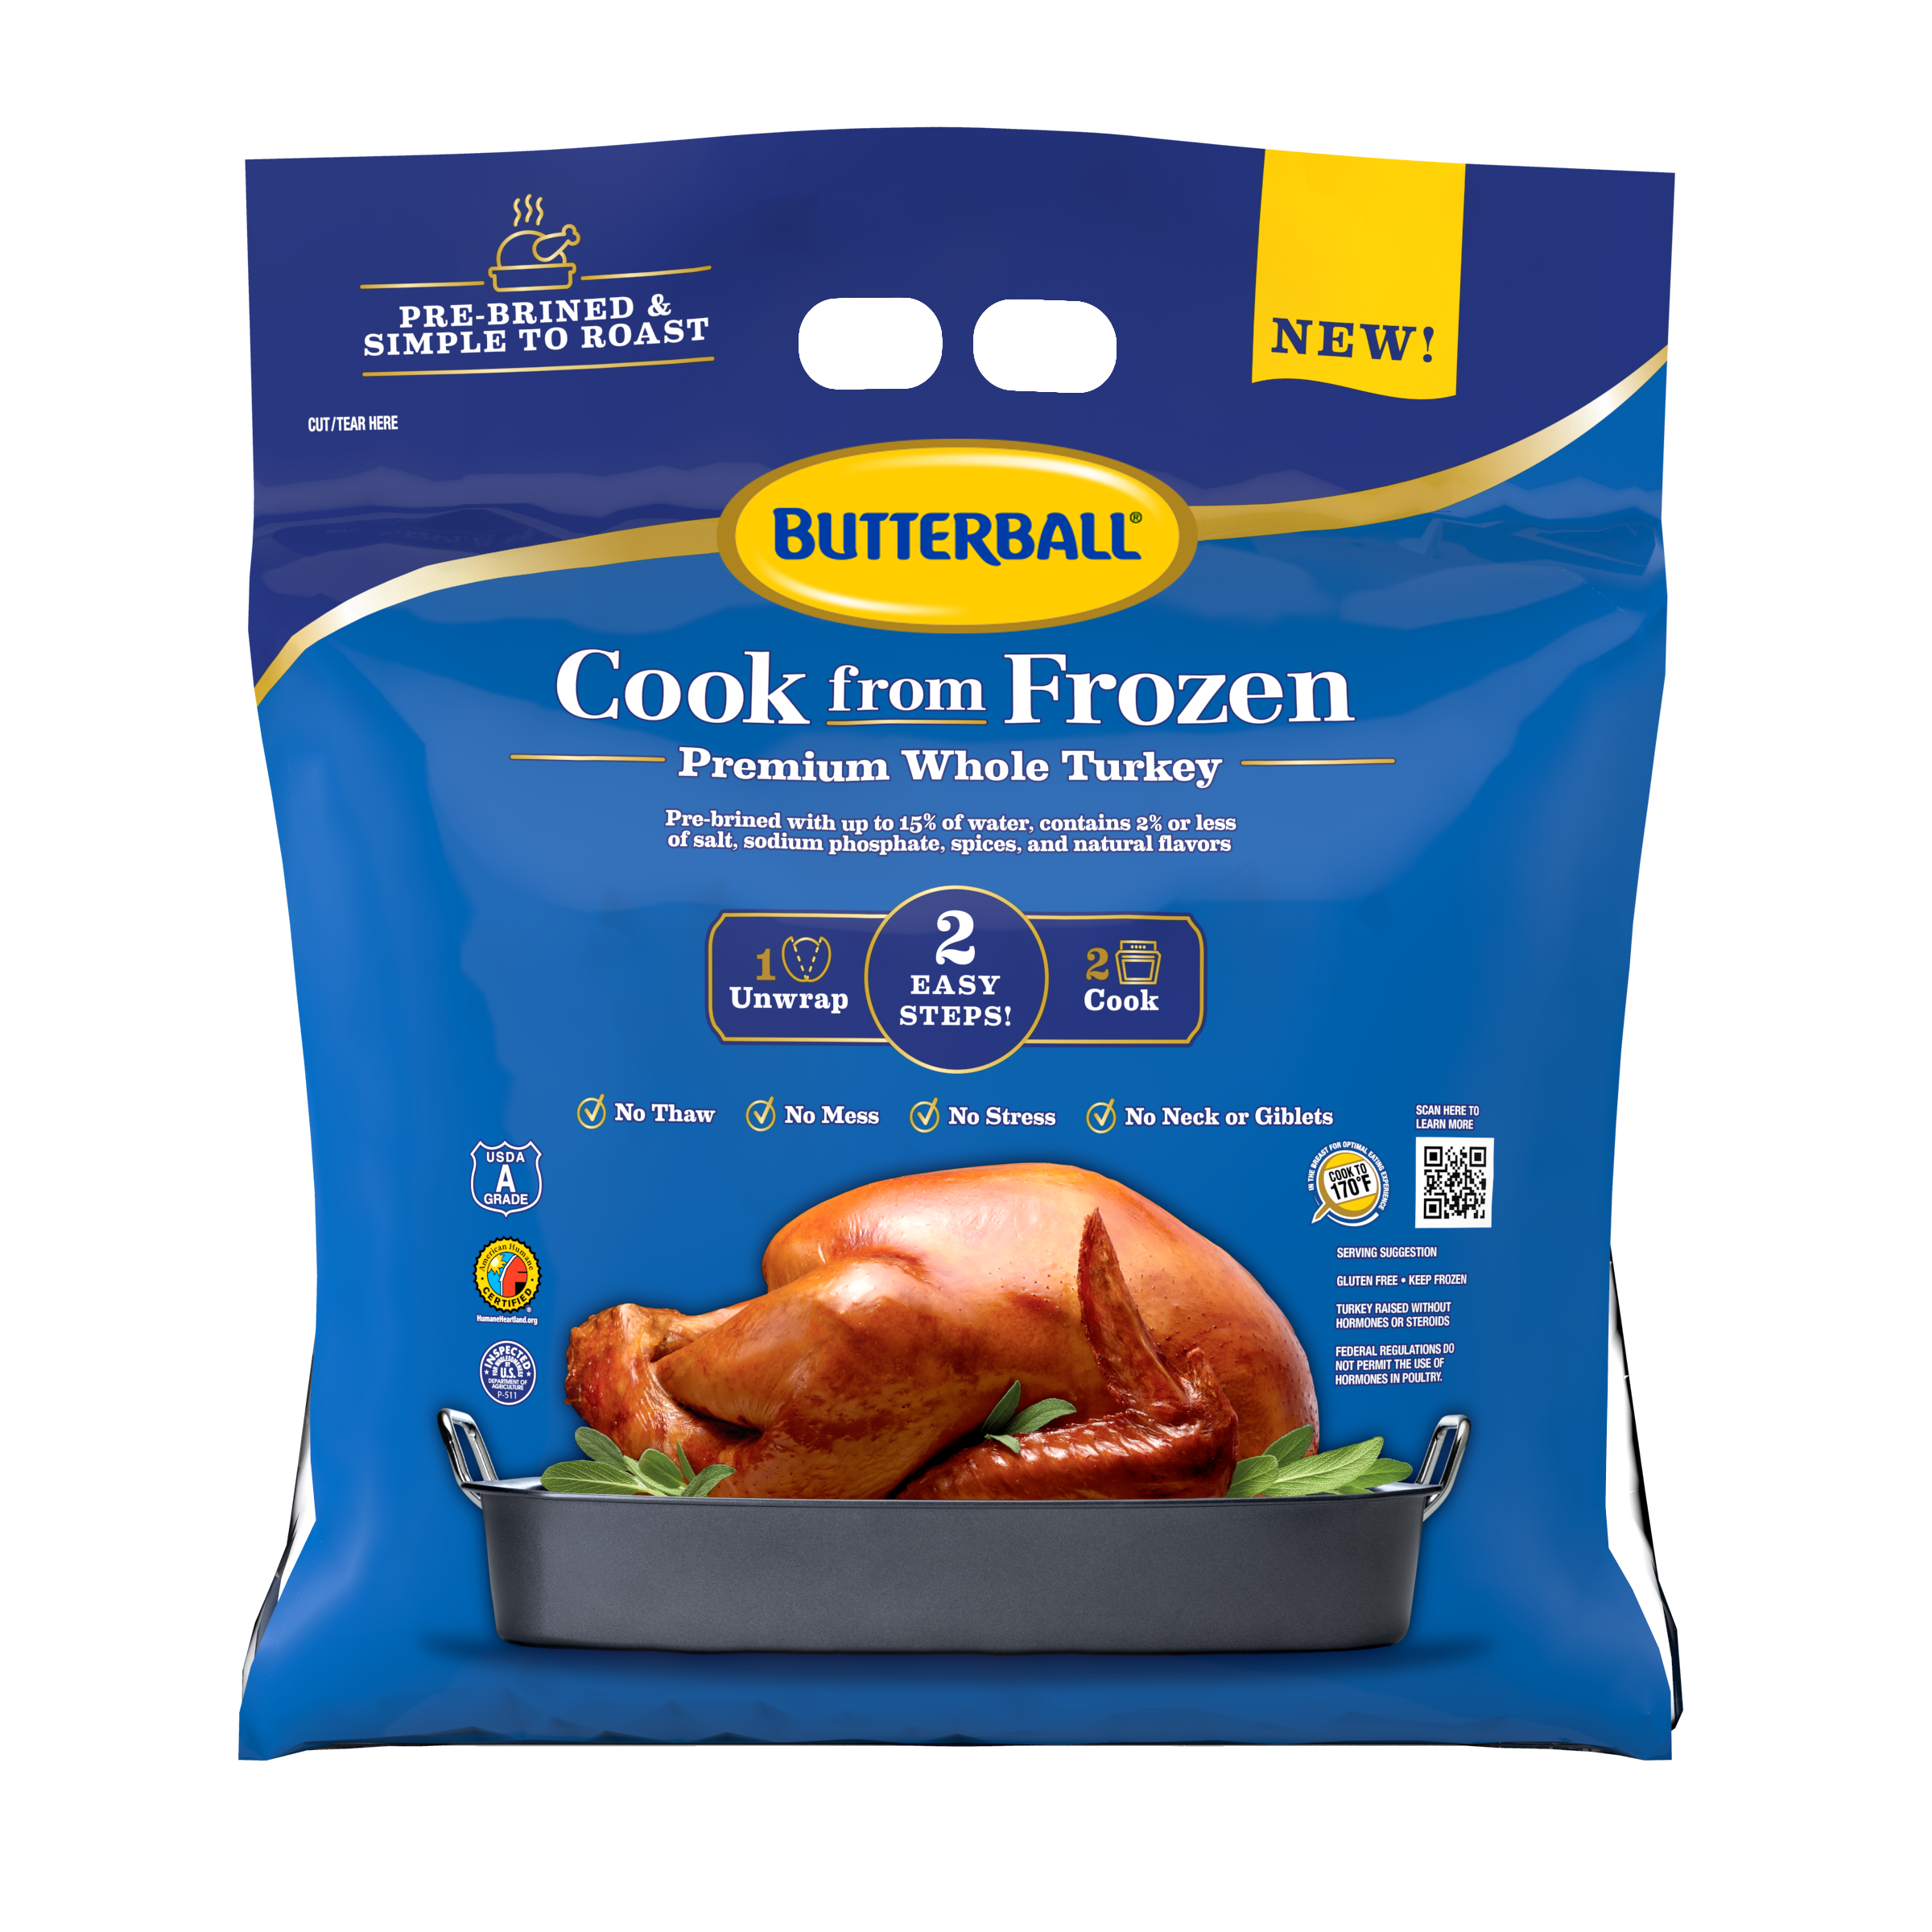 https://www.butterball.com/sites/butterball/files/2023-11/BB011_Butterball_Frozen_Turkey_Complete_Render_Front_01_RV03_2400x2400_EDIT.png